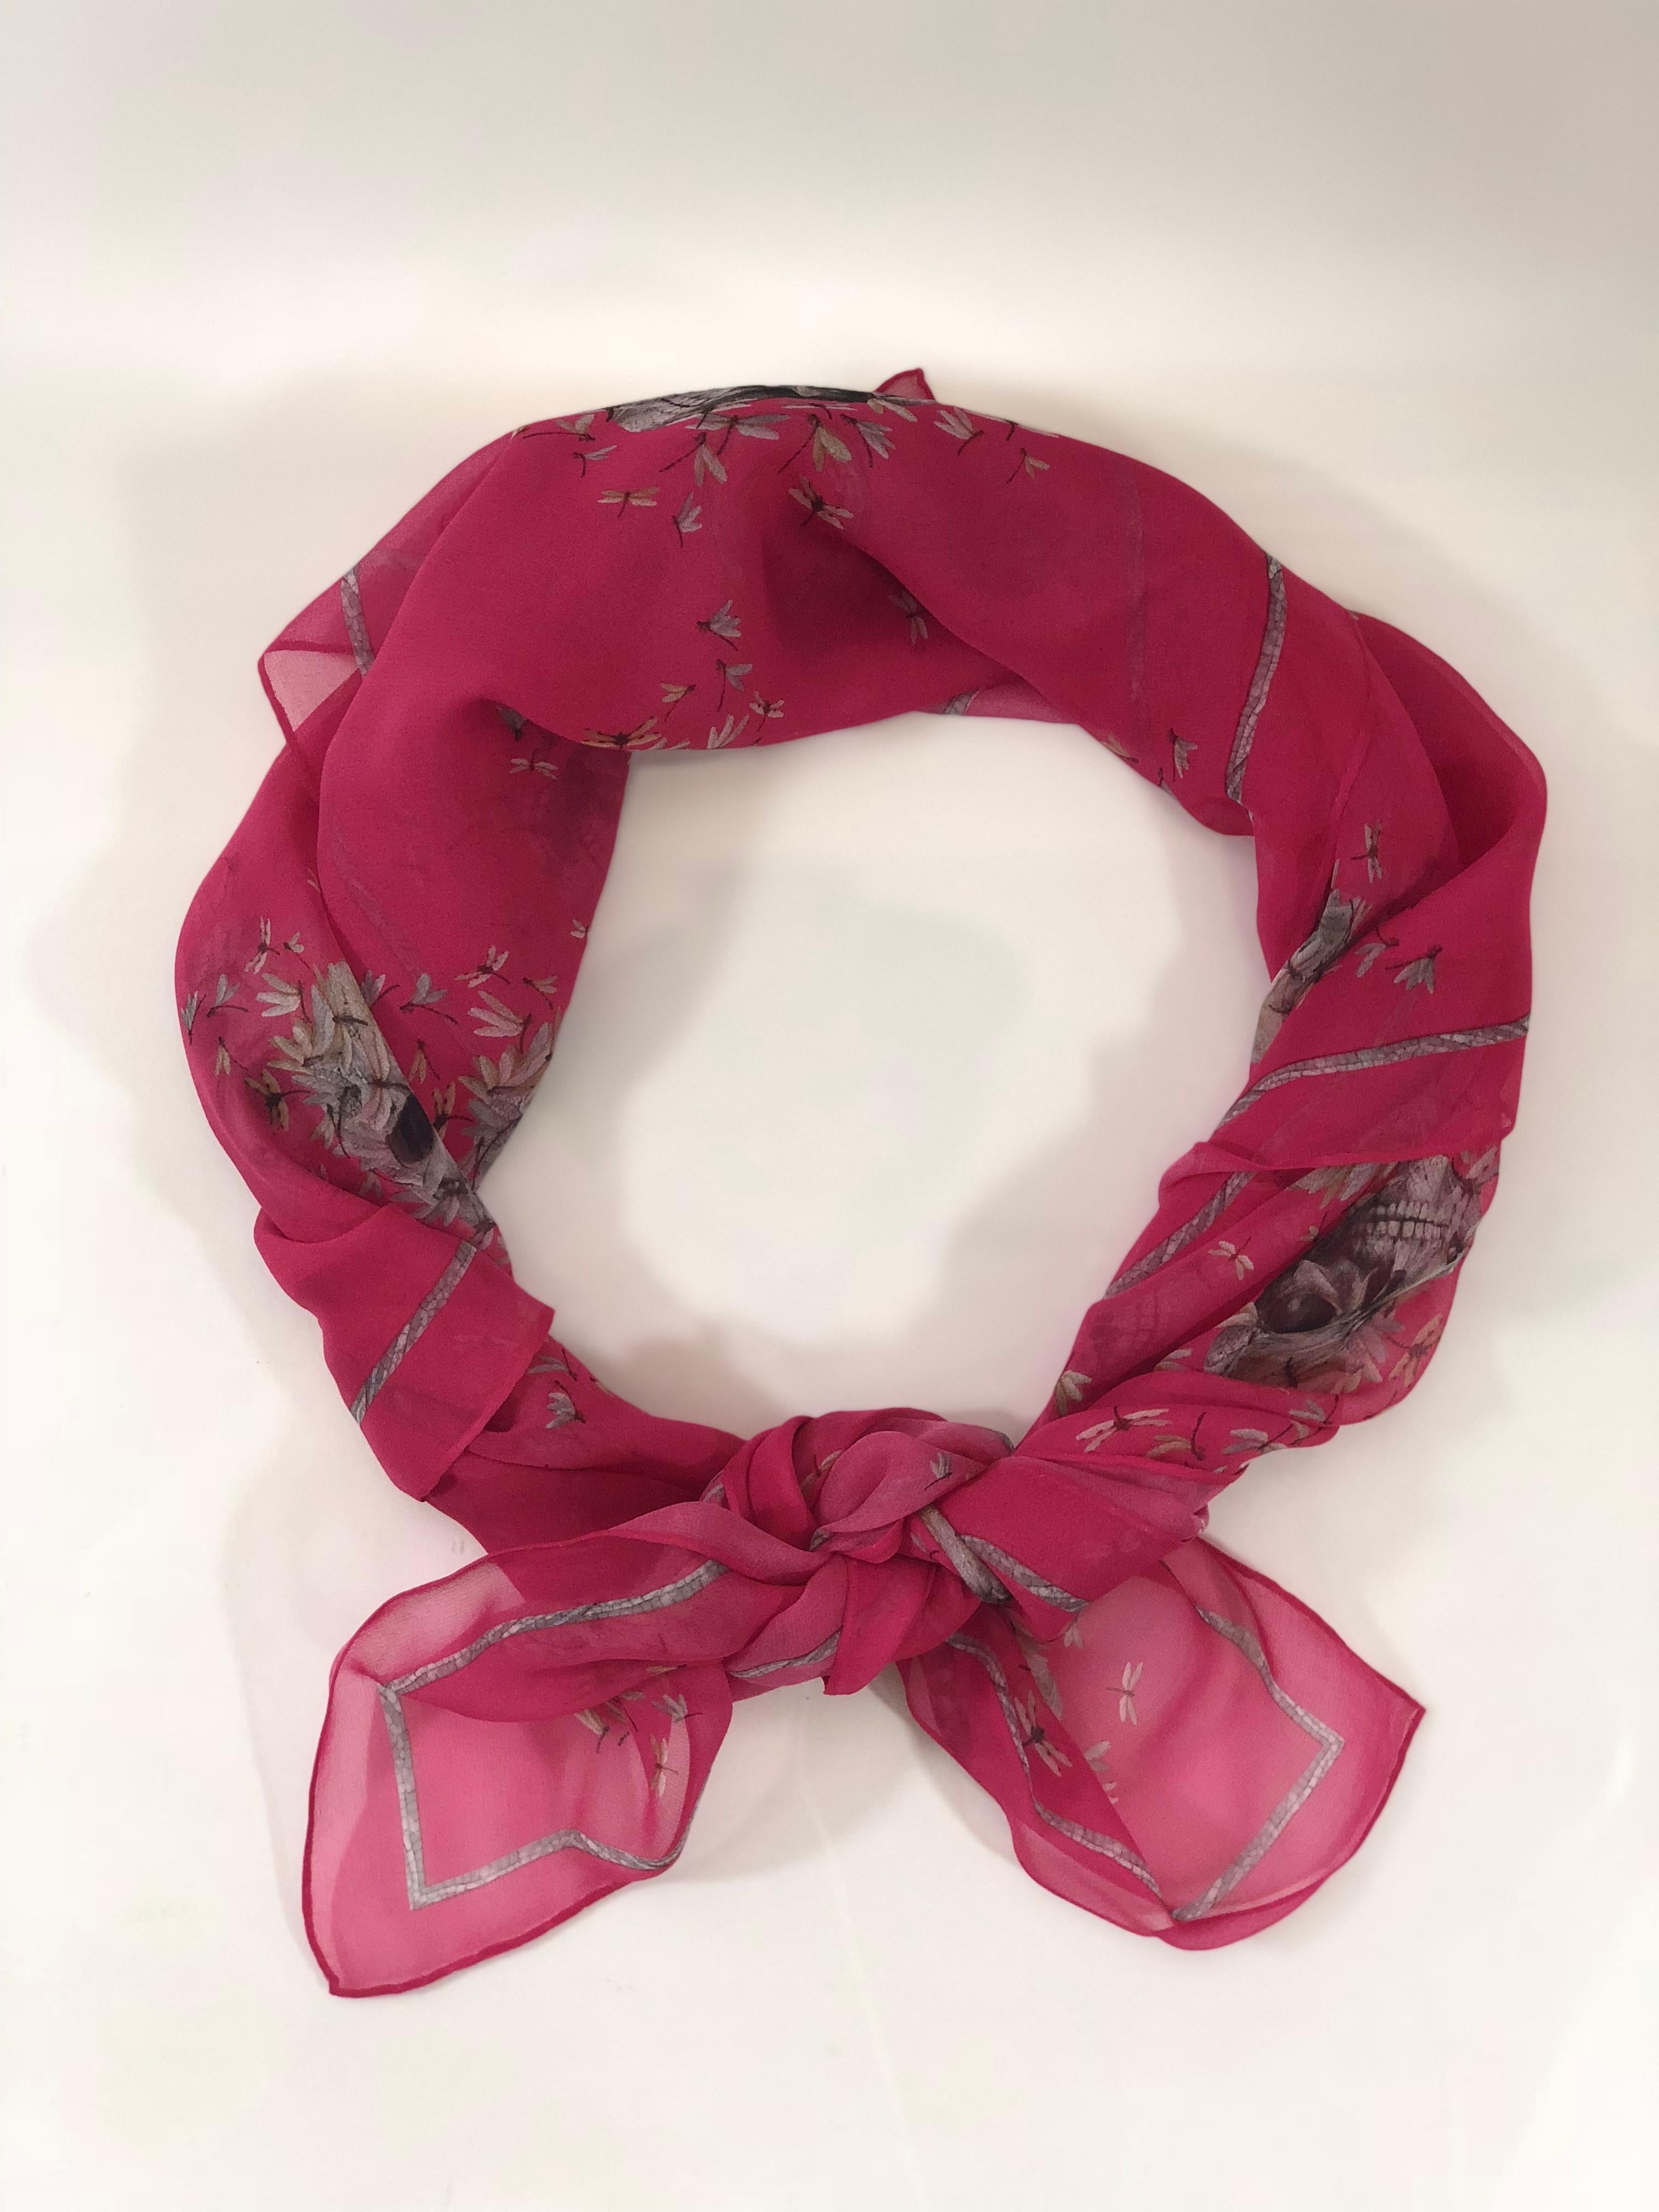 MODEL - Alexander McQueen Silk Chiffon Skull Scarf in Pink

CONDITION - Exceptional.

SKU - 2205

ORIGINAL RETAIL PRICE - $350 + tax (Approx.)

DIMENSIONS - L36.5 x H36.5 x D.01

MATERIAL - Silk

COMES WITH - No Additional Accessories

AVAILABLE IN